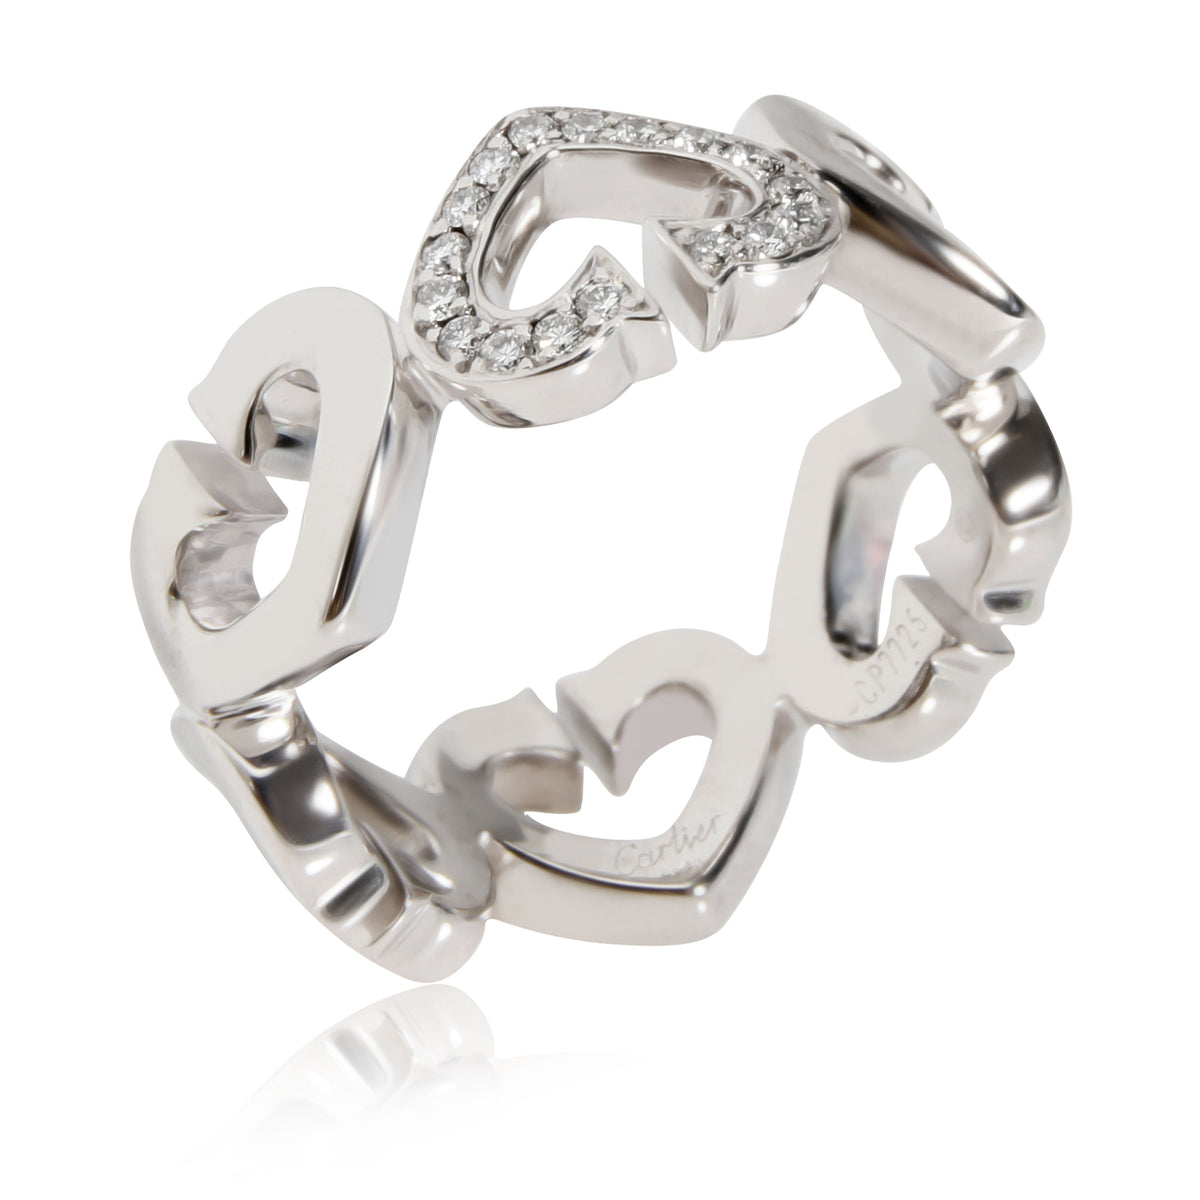 Cartier Hearts and Symbols Diamond Band in 18k White Gold 0.17 CTW